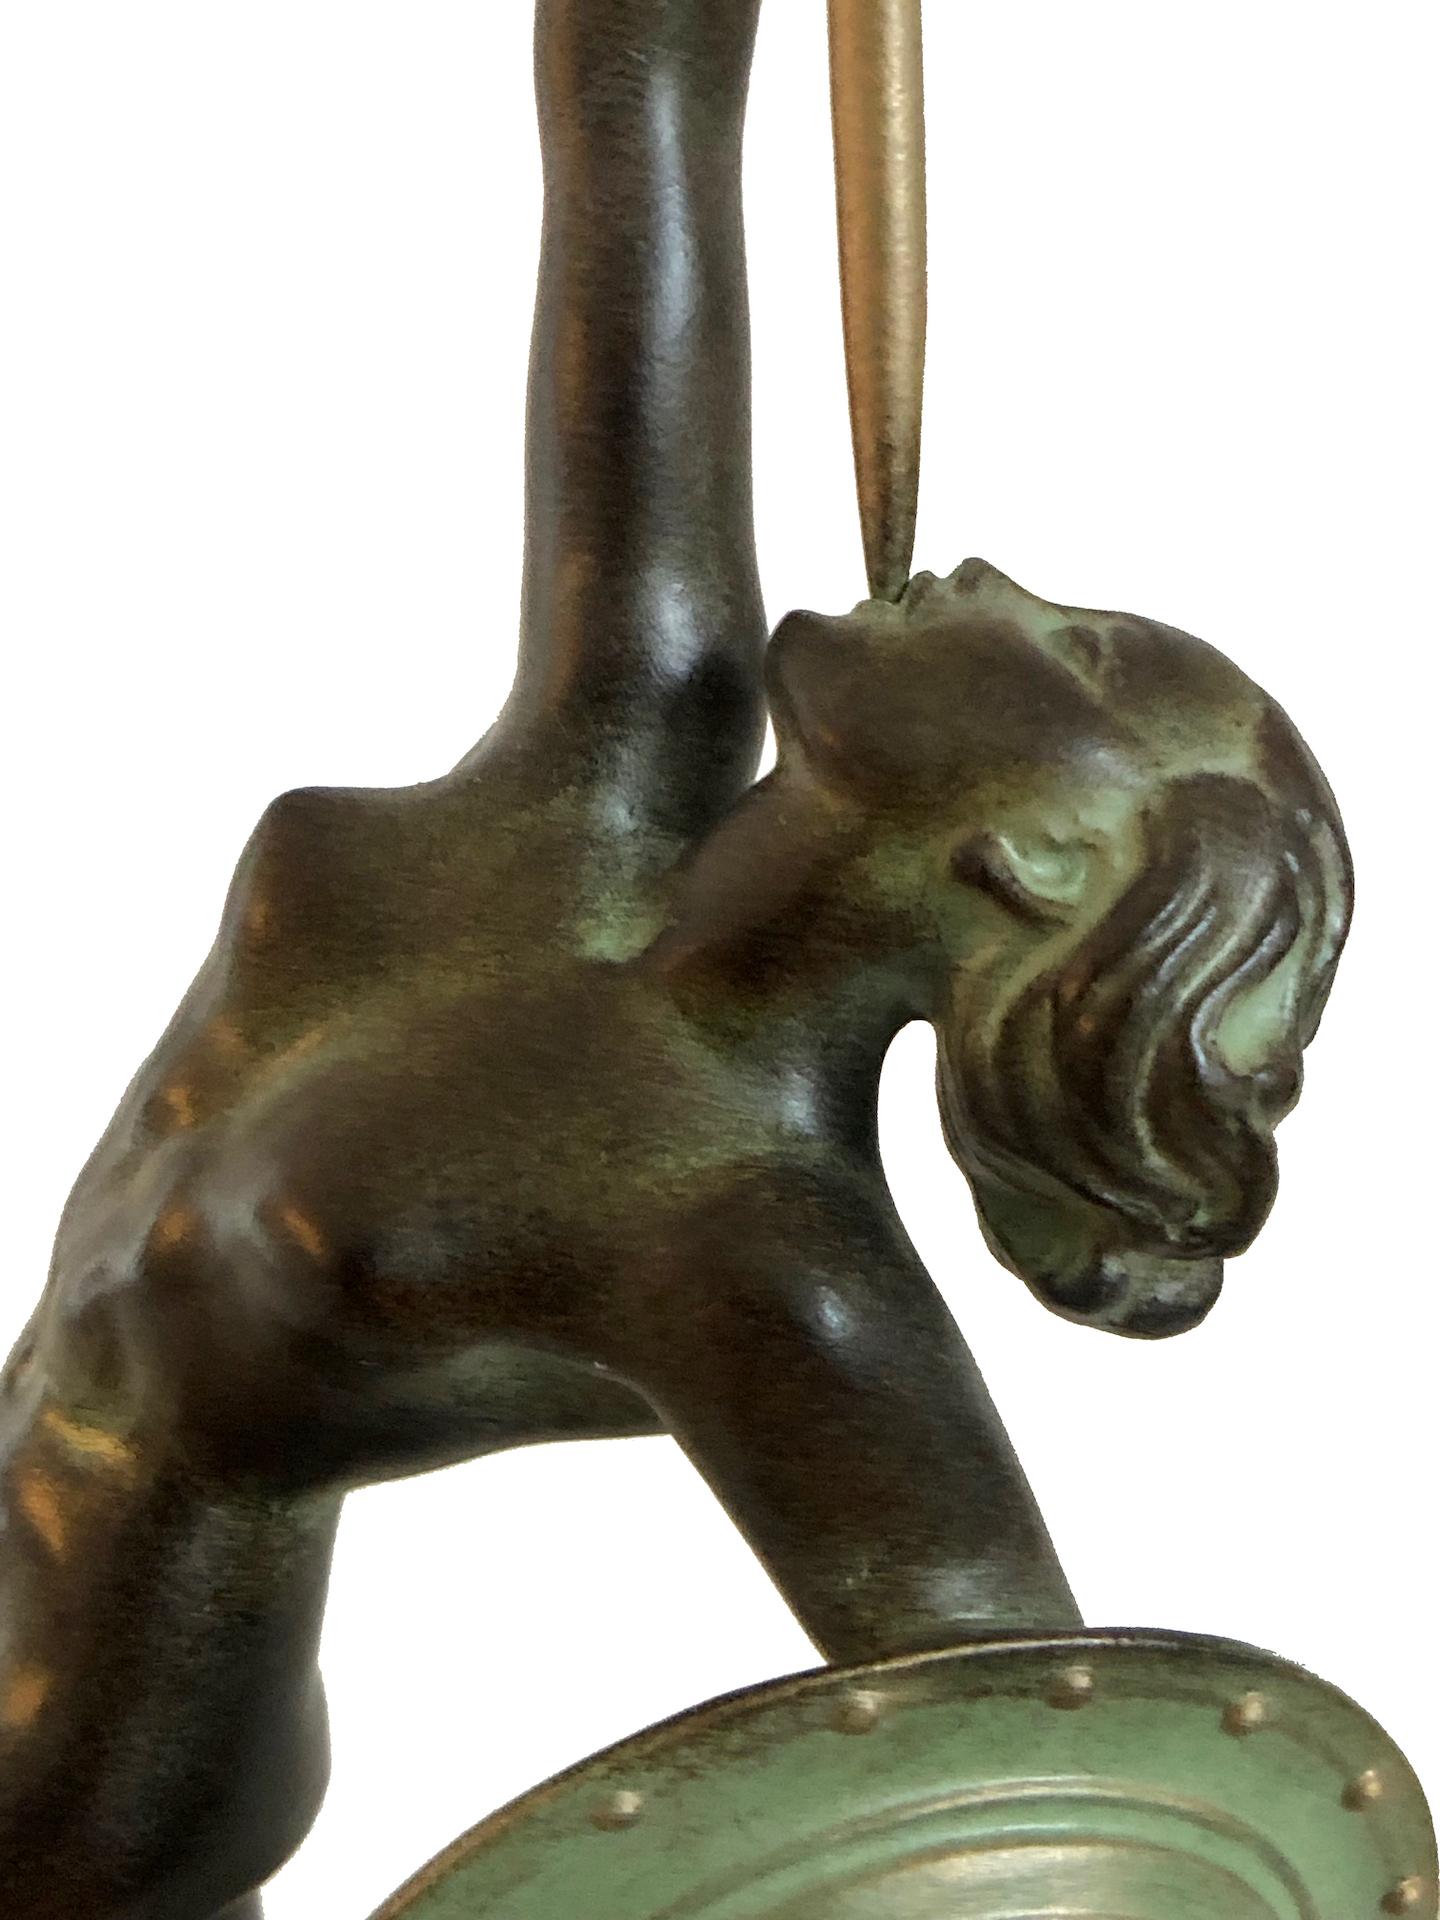 “Jericho”
Designed in France during the roaring 1920s by “Raymonde Guerbe” (1894-1995)
signed “GUERBE”
Original “Max Le Verrier”
Art Deco Style, France

Sculpture made in “Régule” (spelter)
Socle in black marble (could have a different